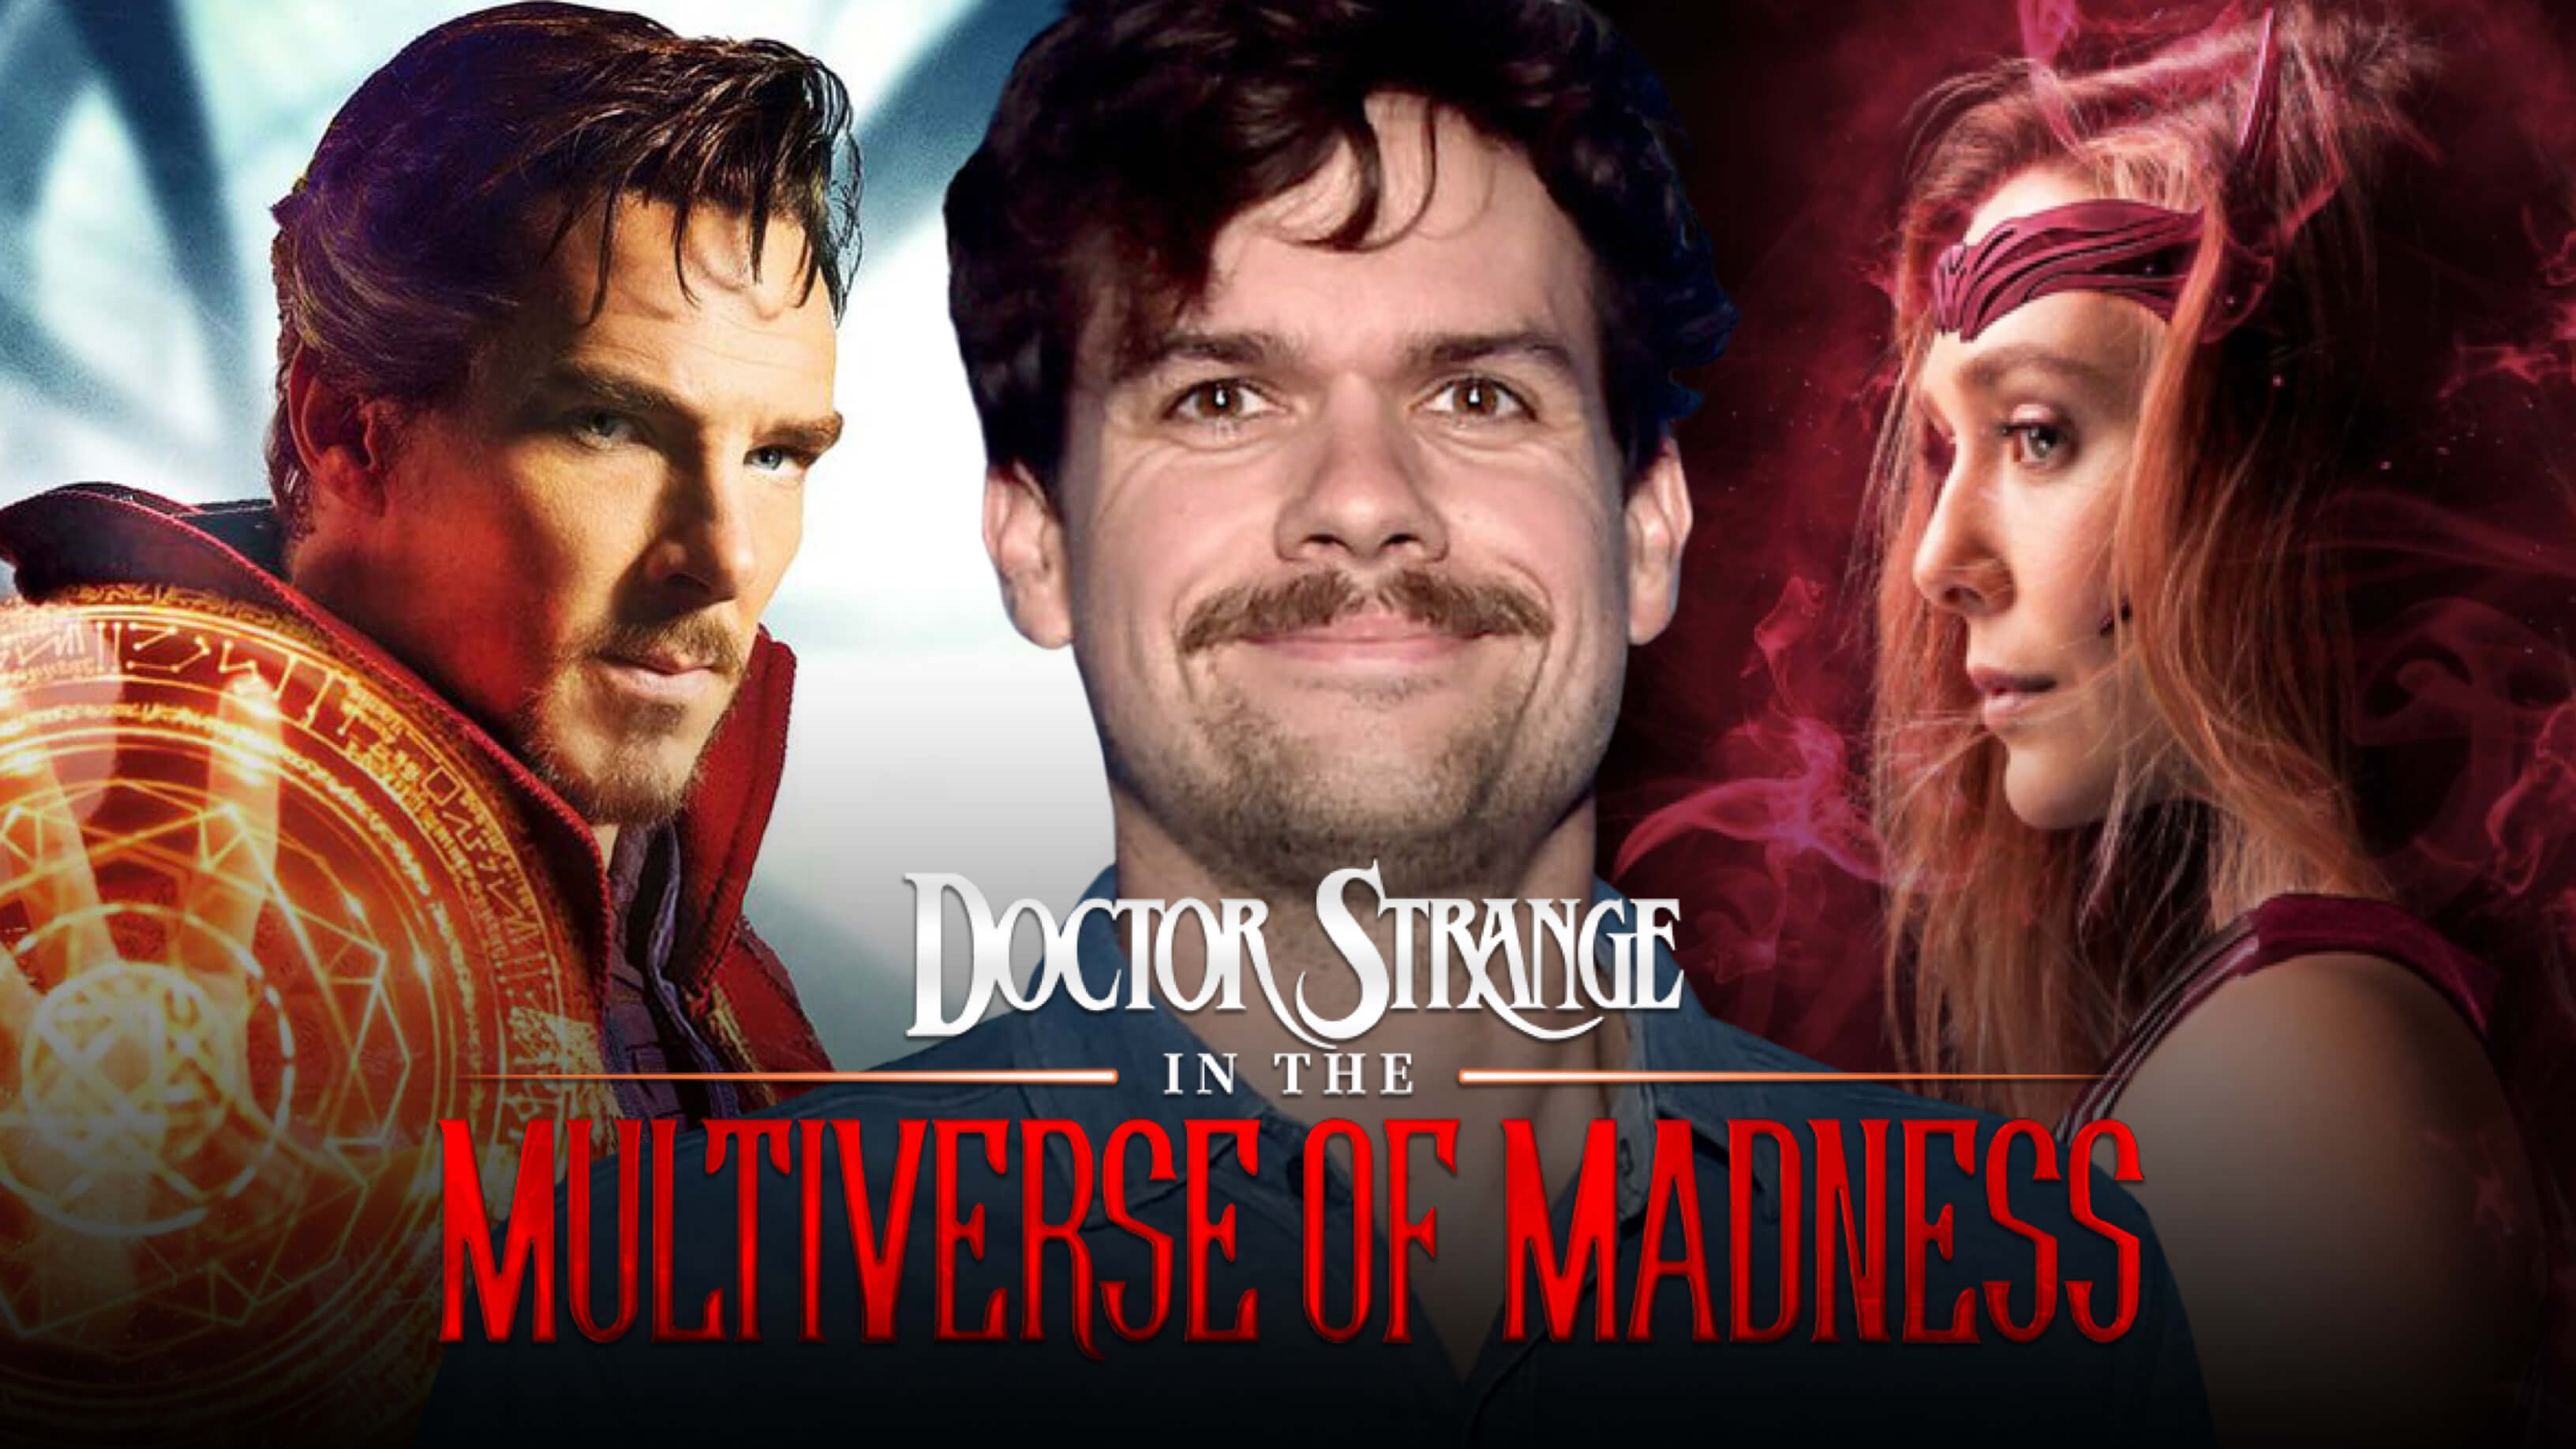 ‘Doctor Strange in the Multiverse of Madness’ Writer Michael Waldron Discusses The Scope of the Project